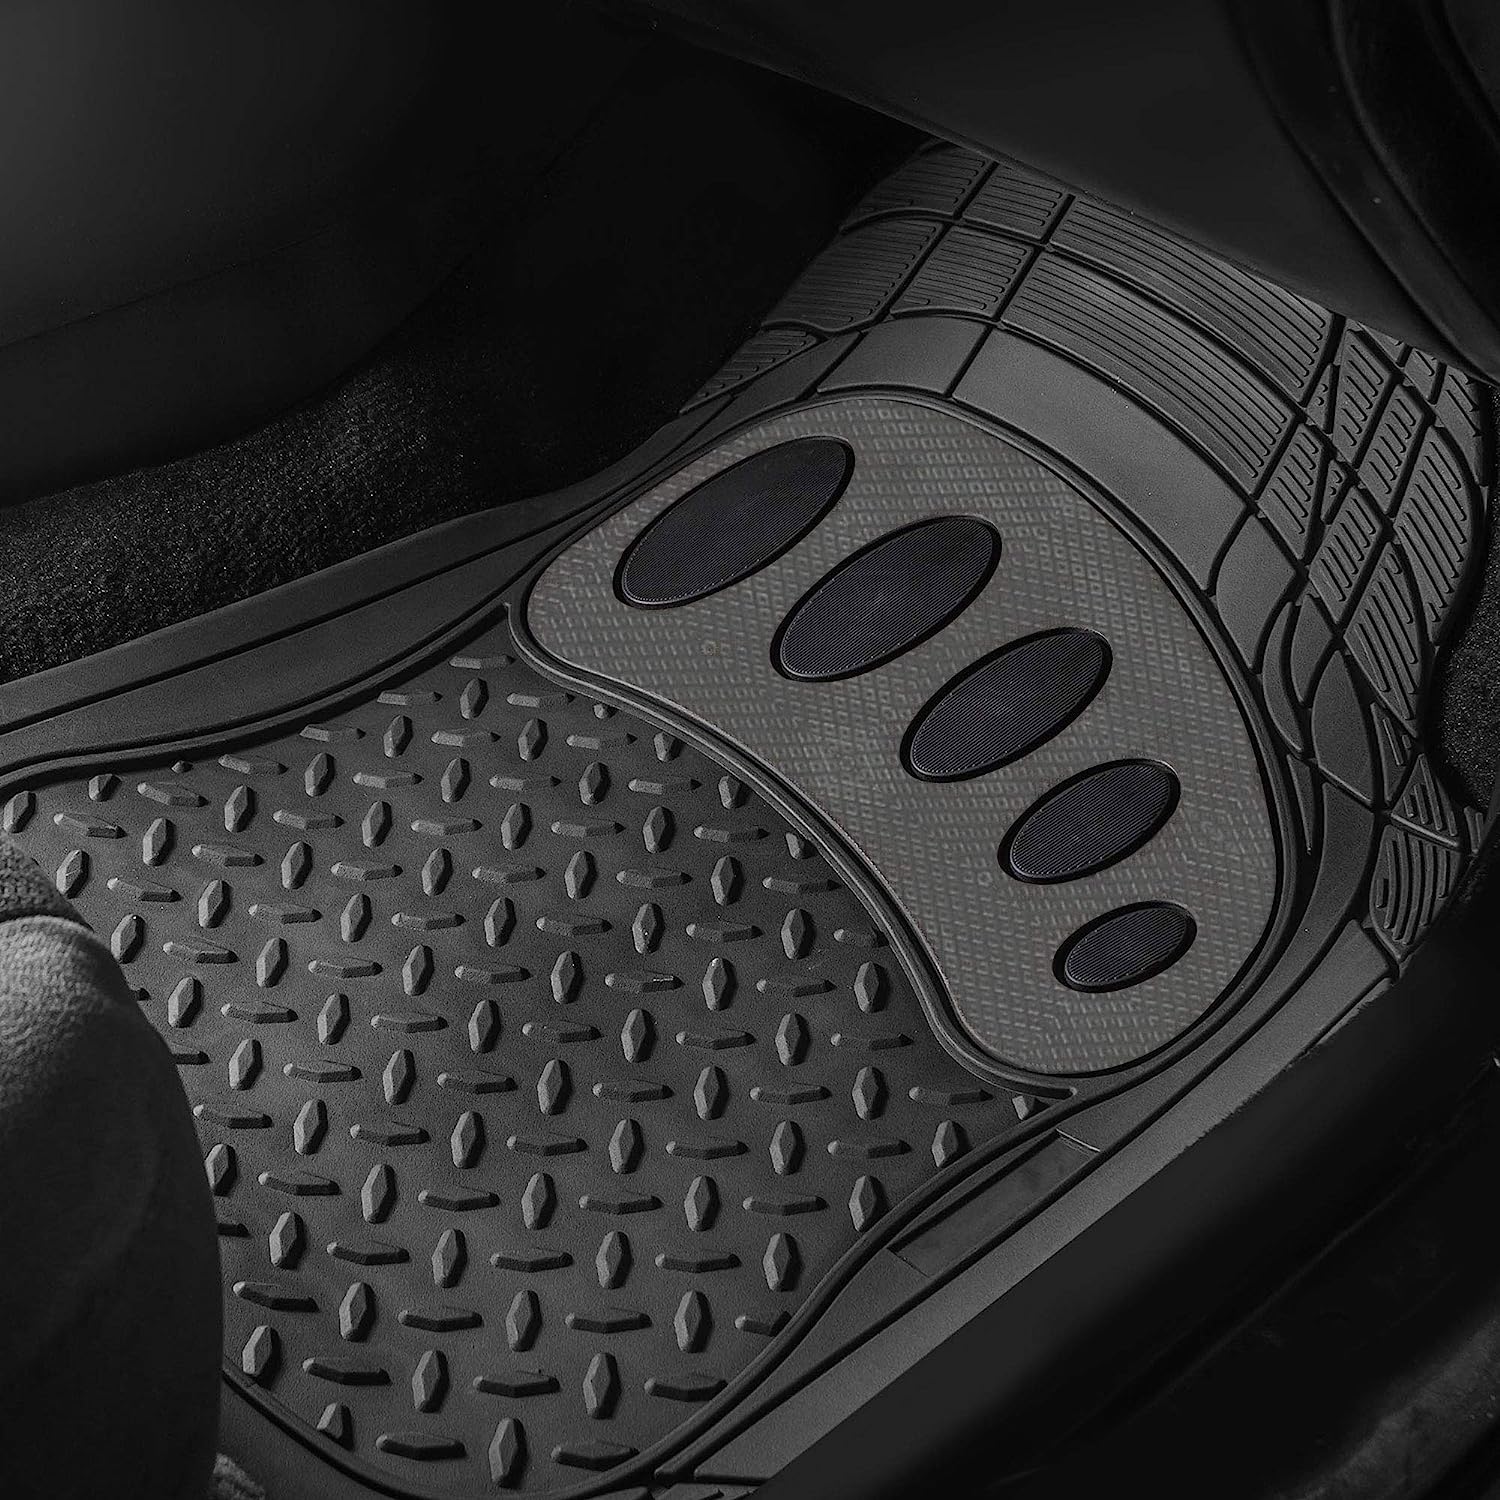 Automotive Floor Mats for Perfect Fit and Style